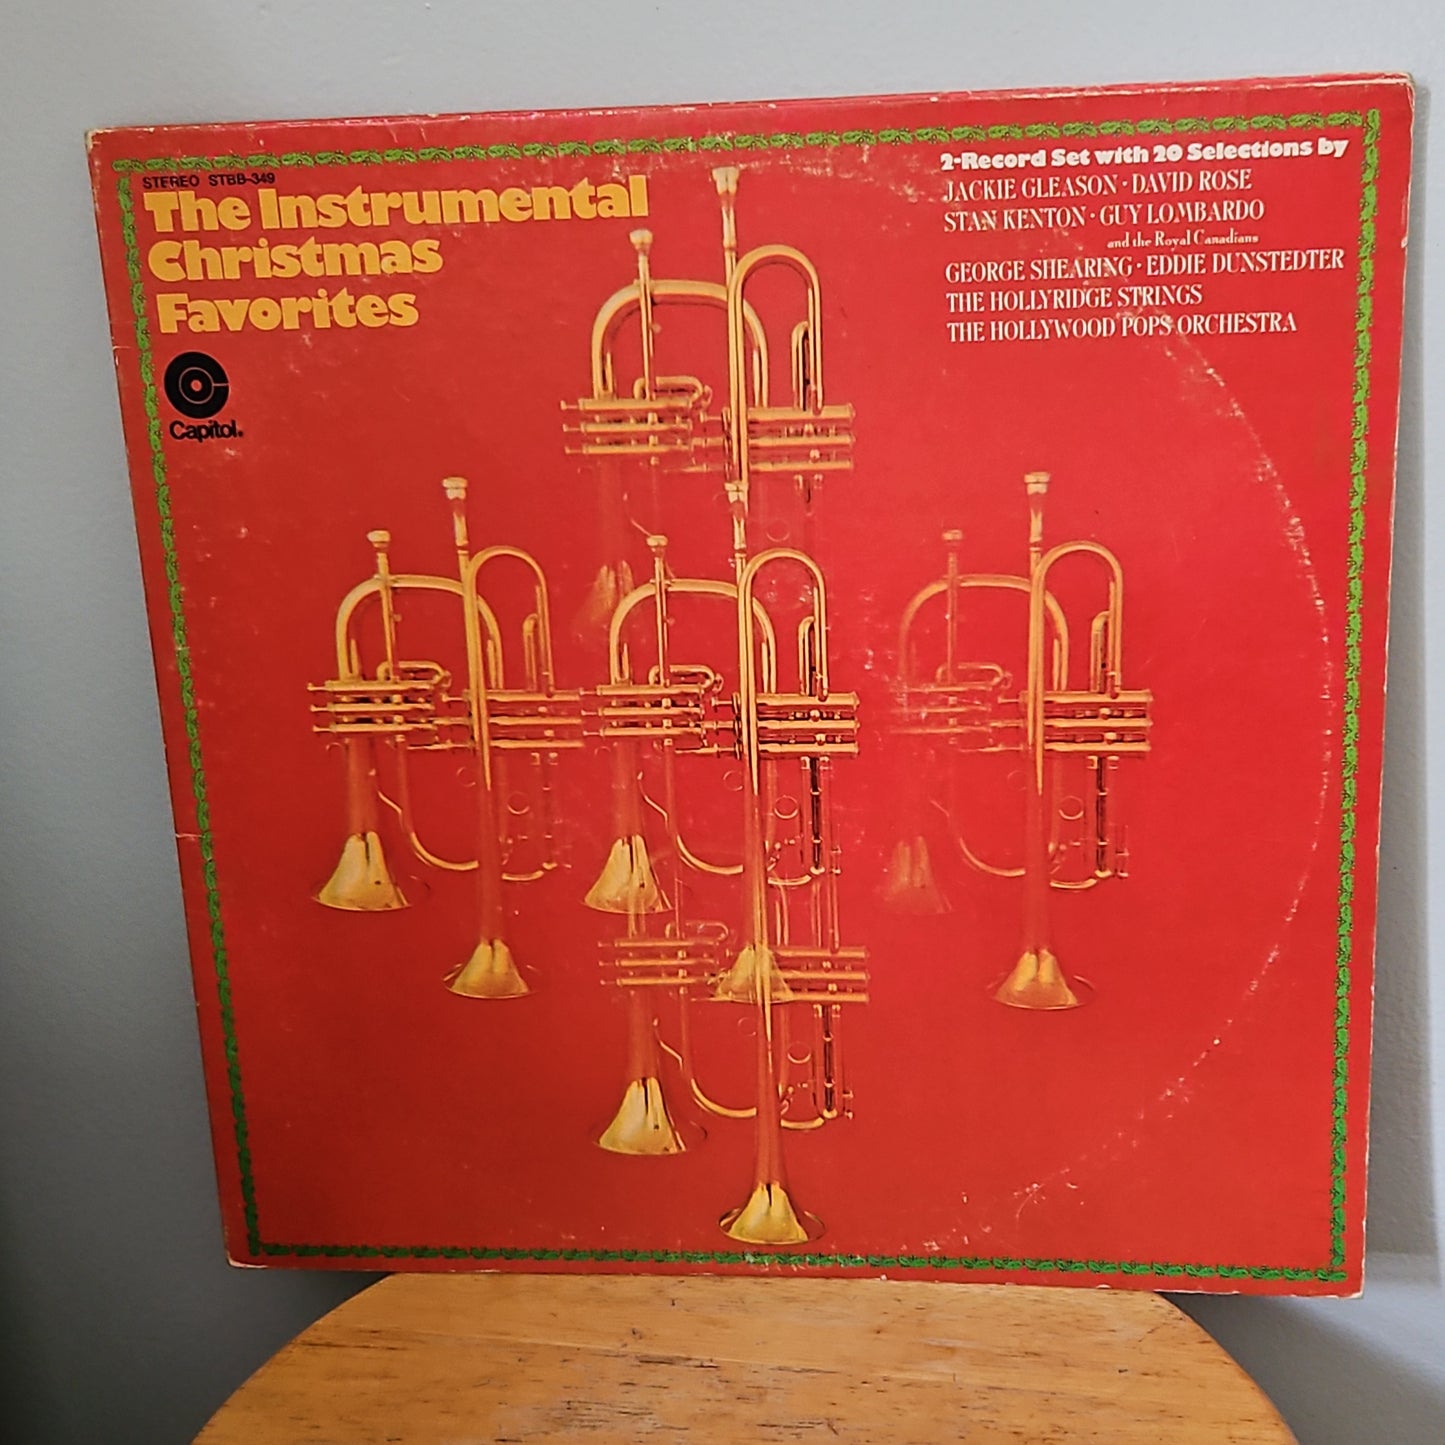 The Instrumental Christmas Favorites 2 Records Set with 20 Selections By Capitol Records